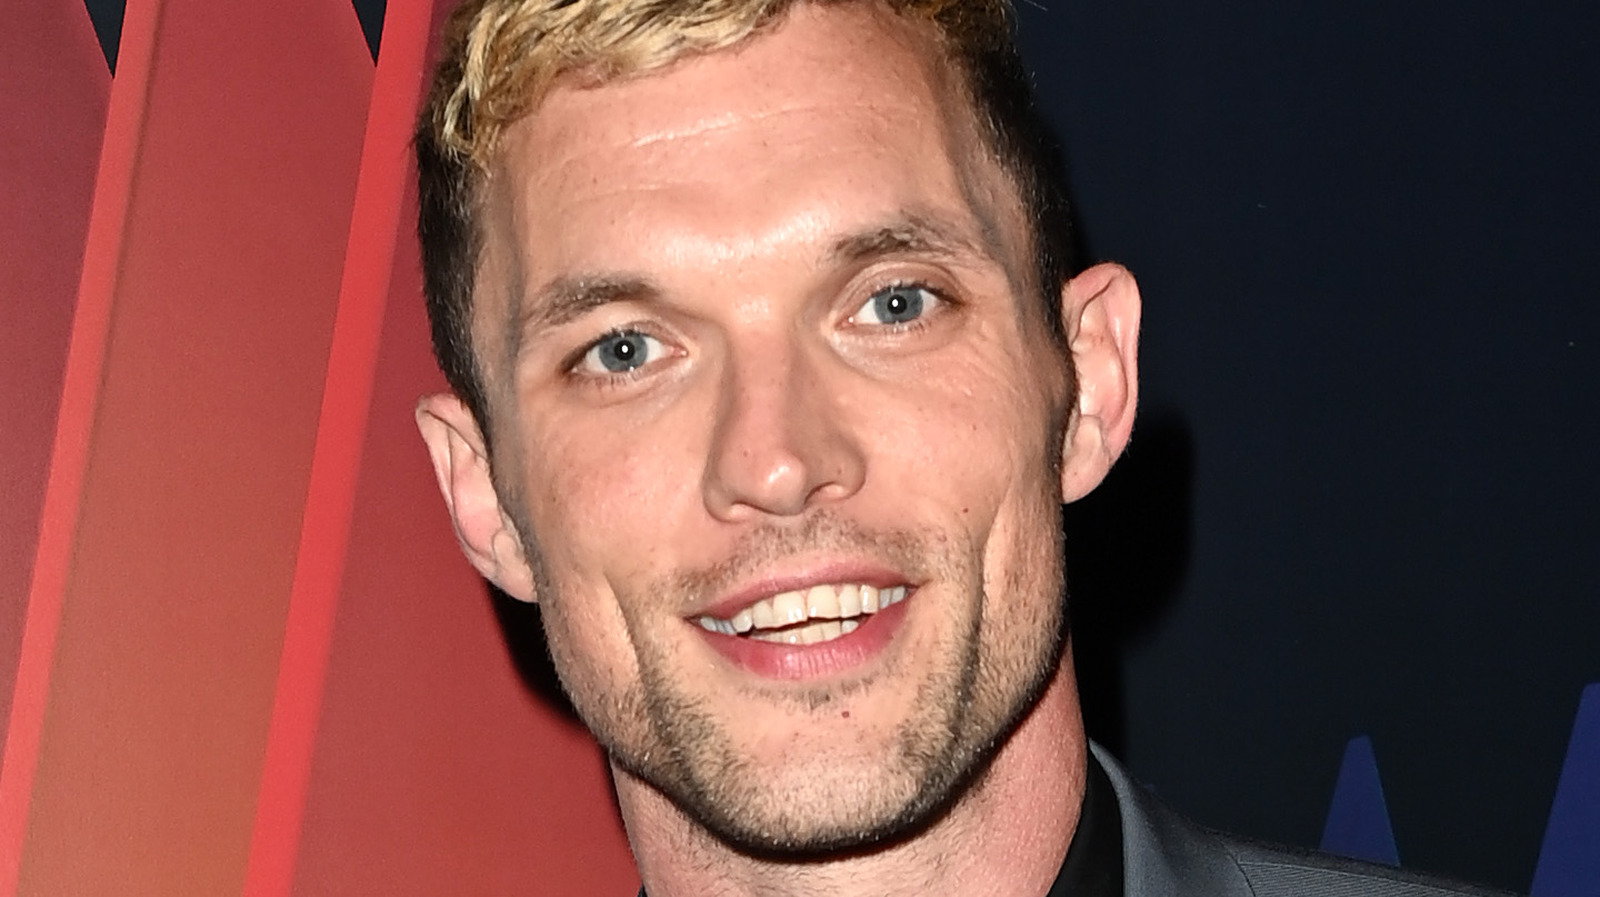 Ed Skrein On How He Developed The Look And Voice Of His Mona Lisa And